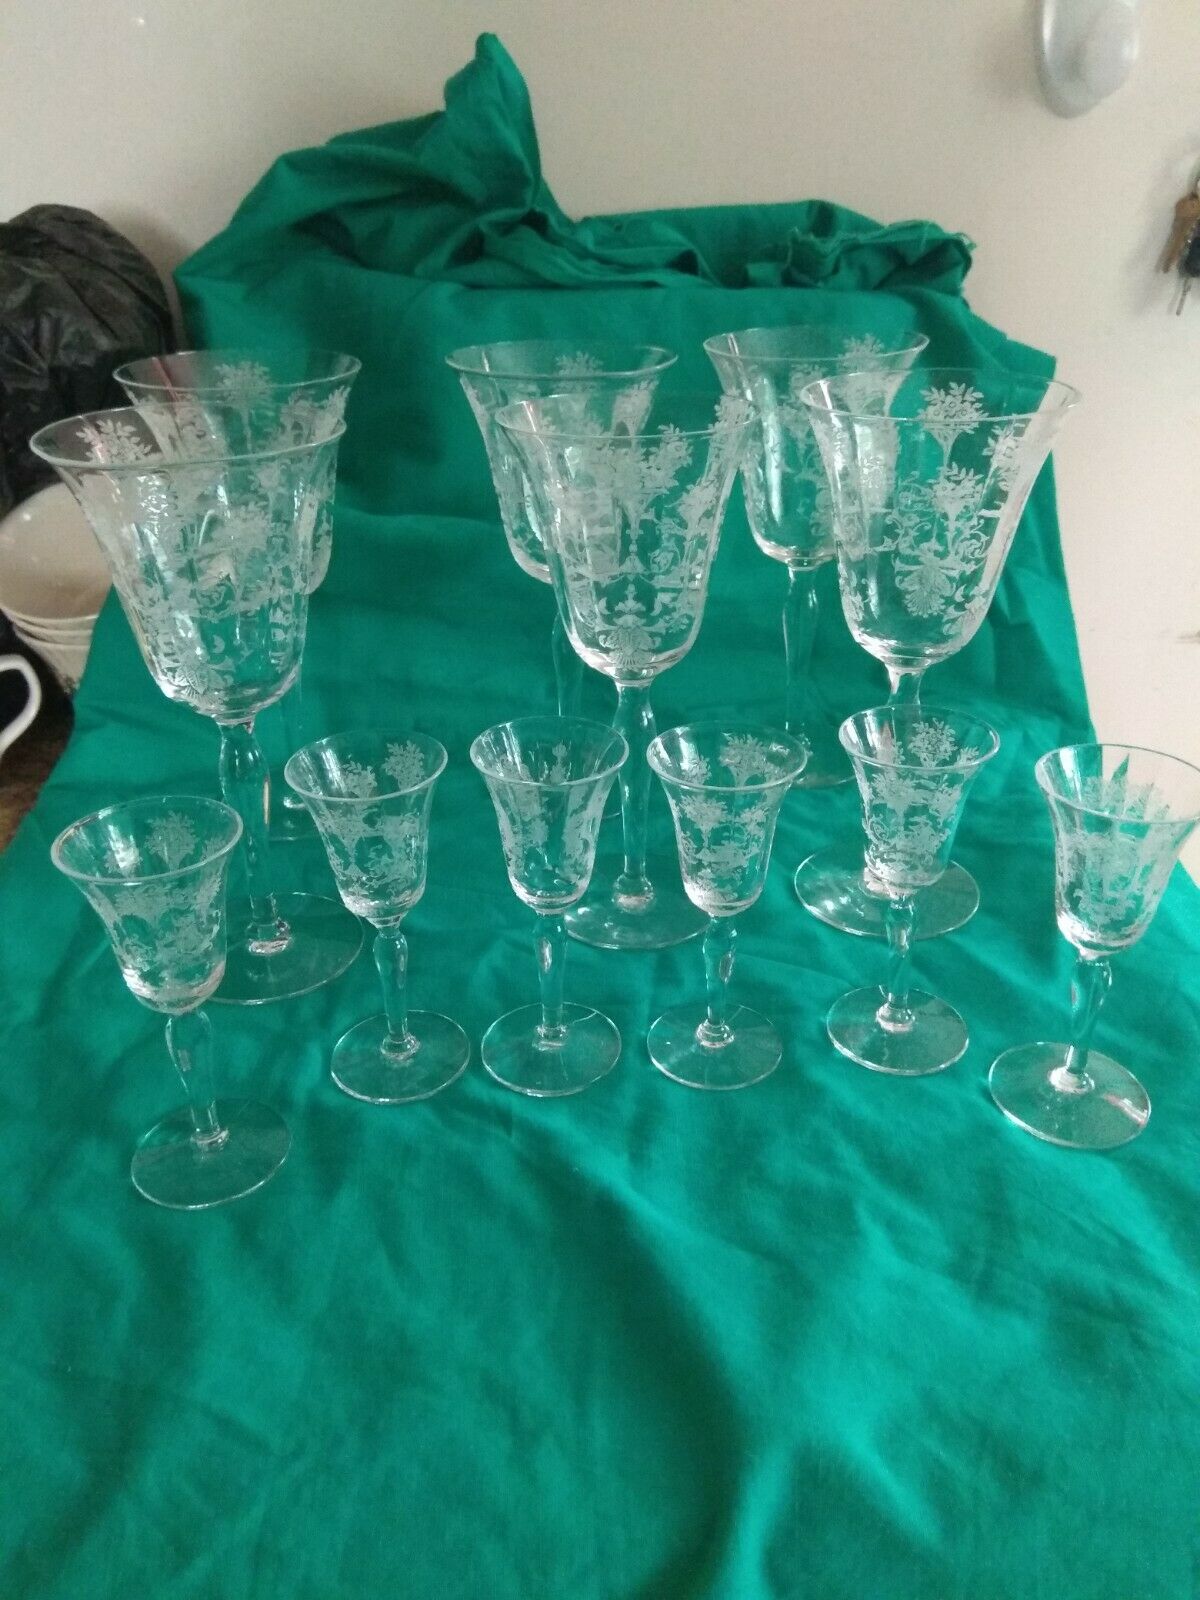 6  Mayfair Optic Goblet Etched Floral Basket Urns &  6 Cordial  By Morgantown